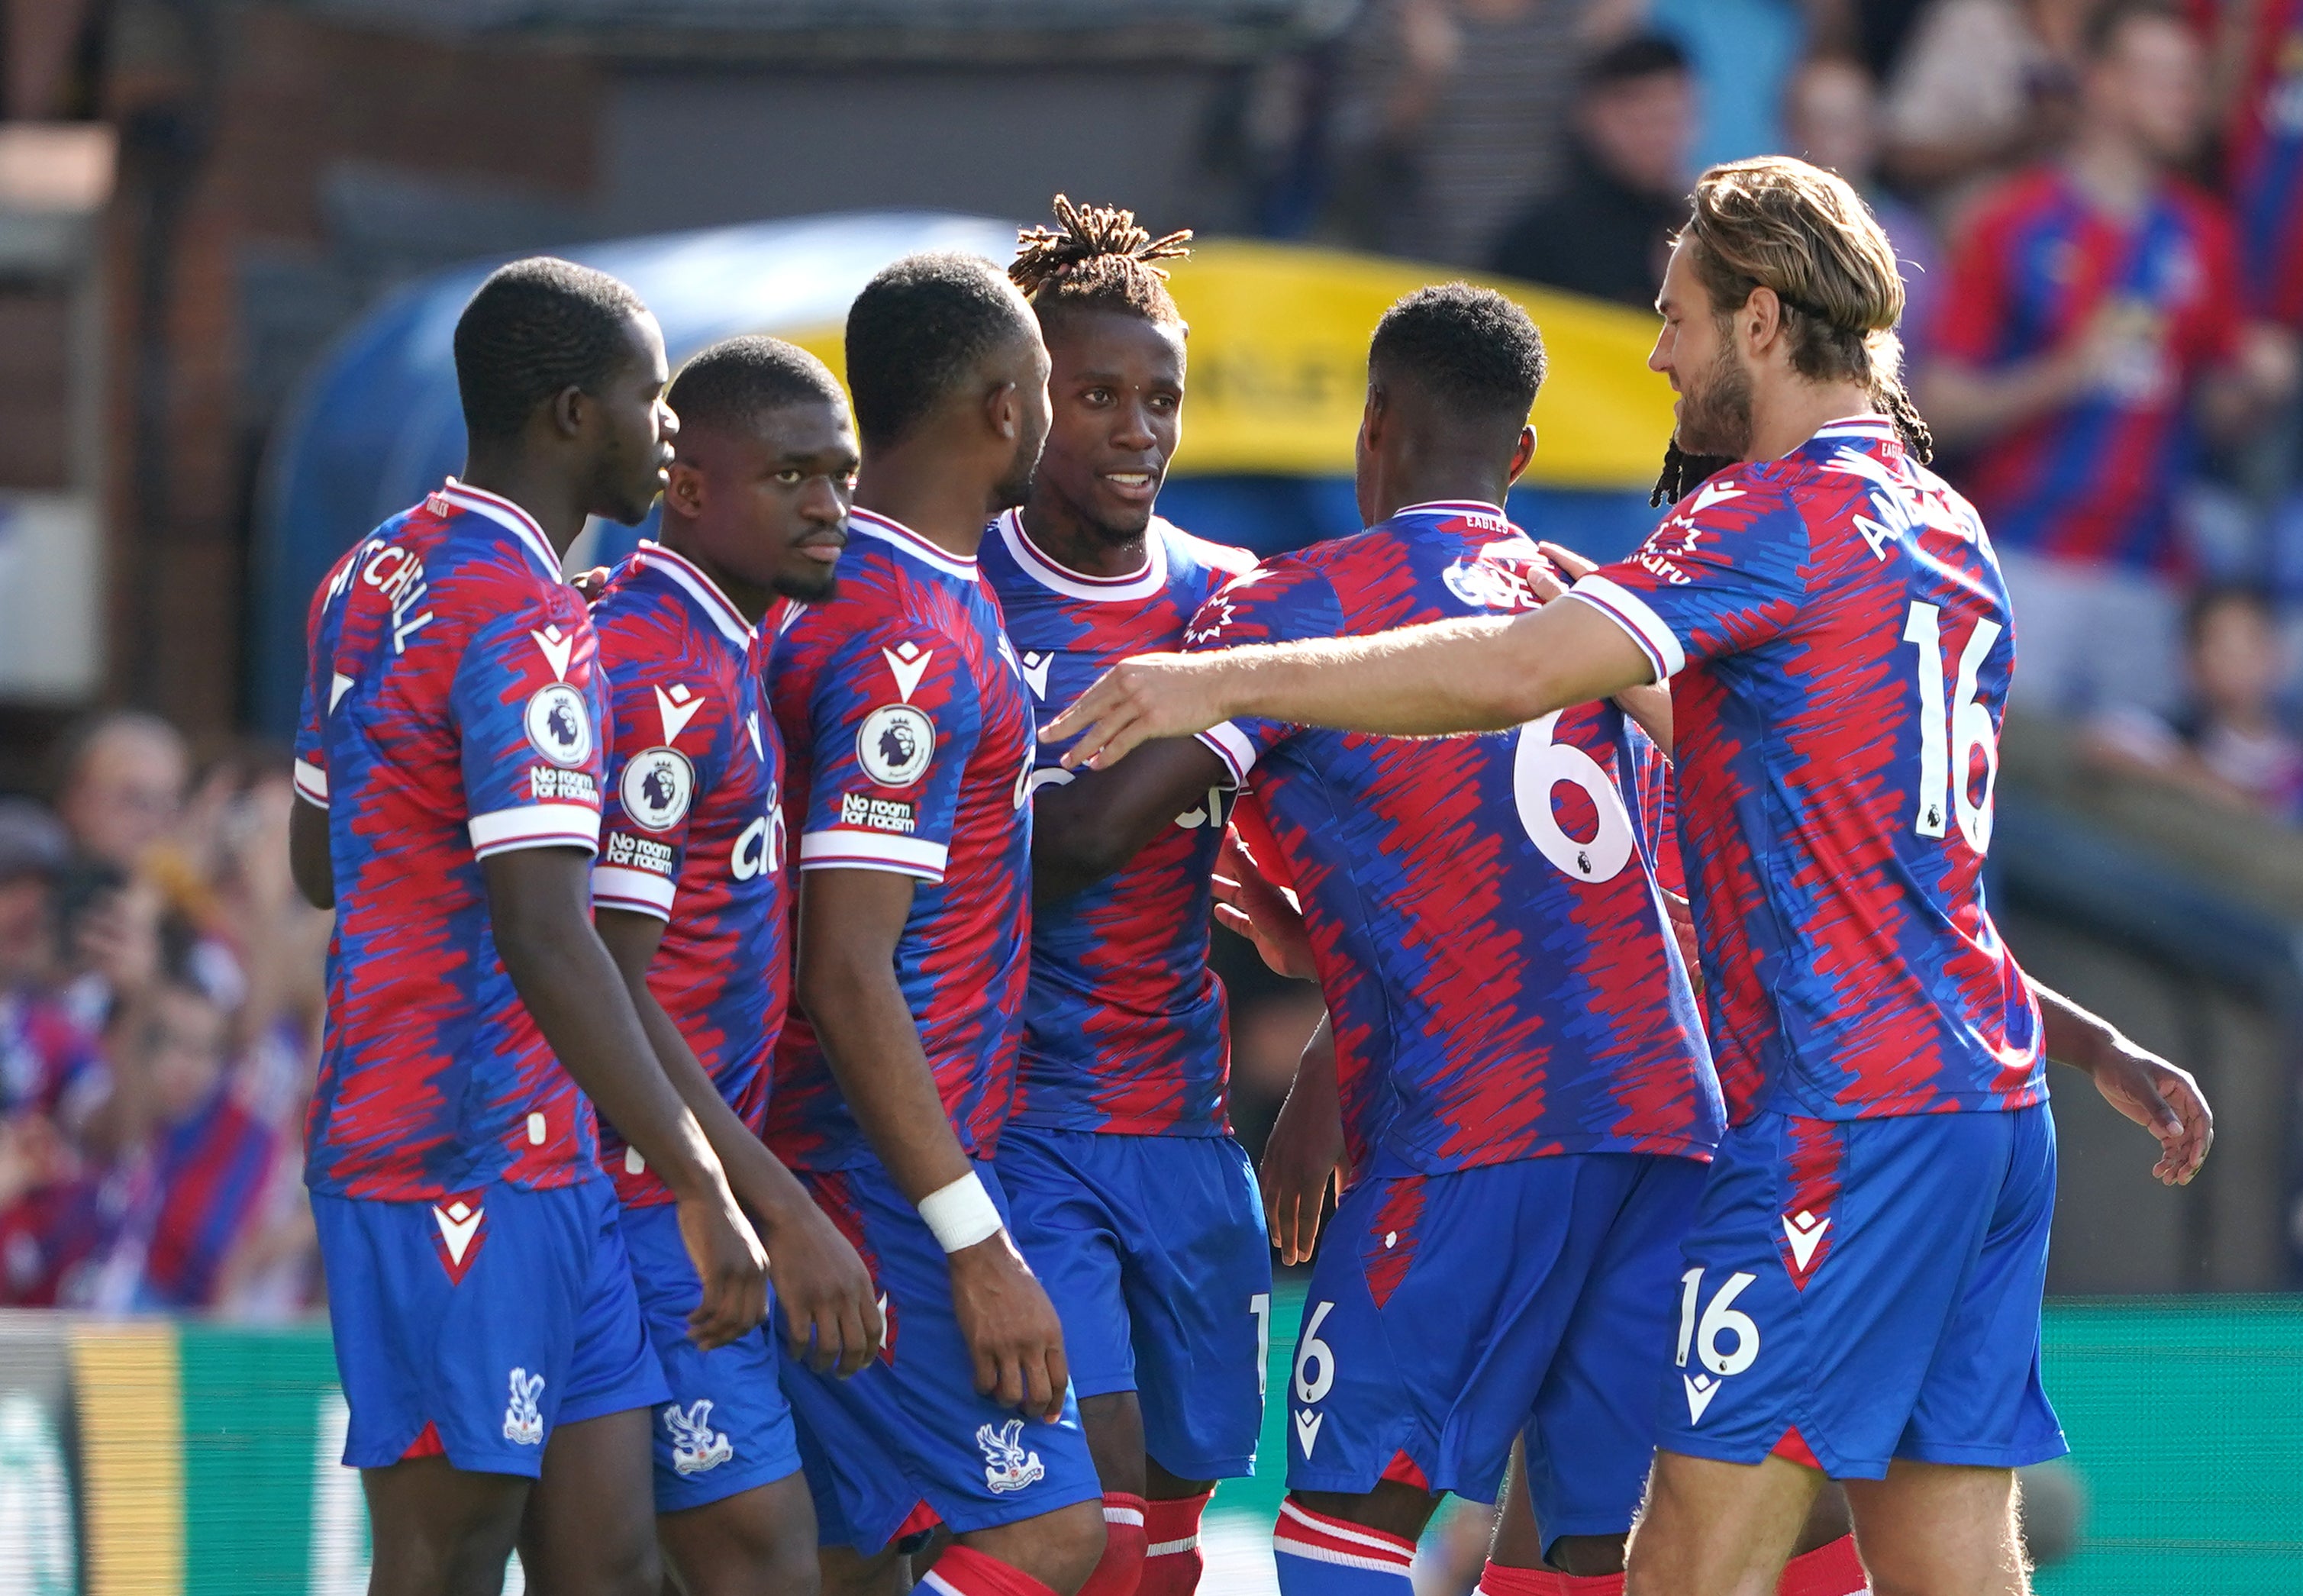 Crystal Palace vs Aston Villa result: Wilfried Zaha scores twice in comeback victory | The Independent